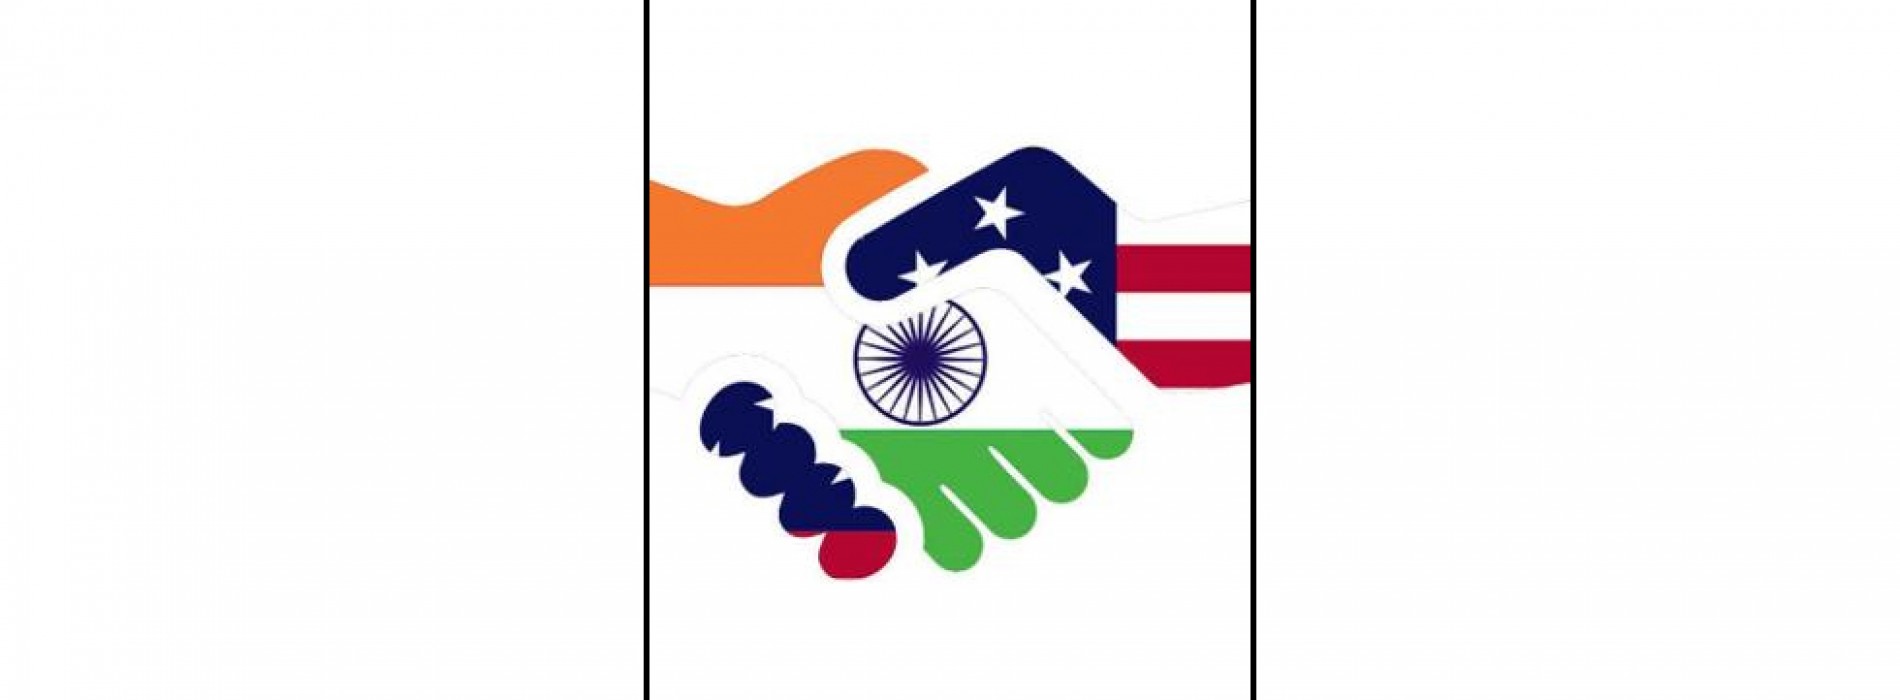 US exploring new partnership in smart cities in India